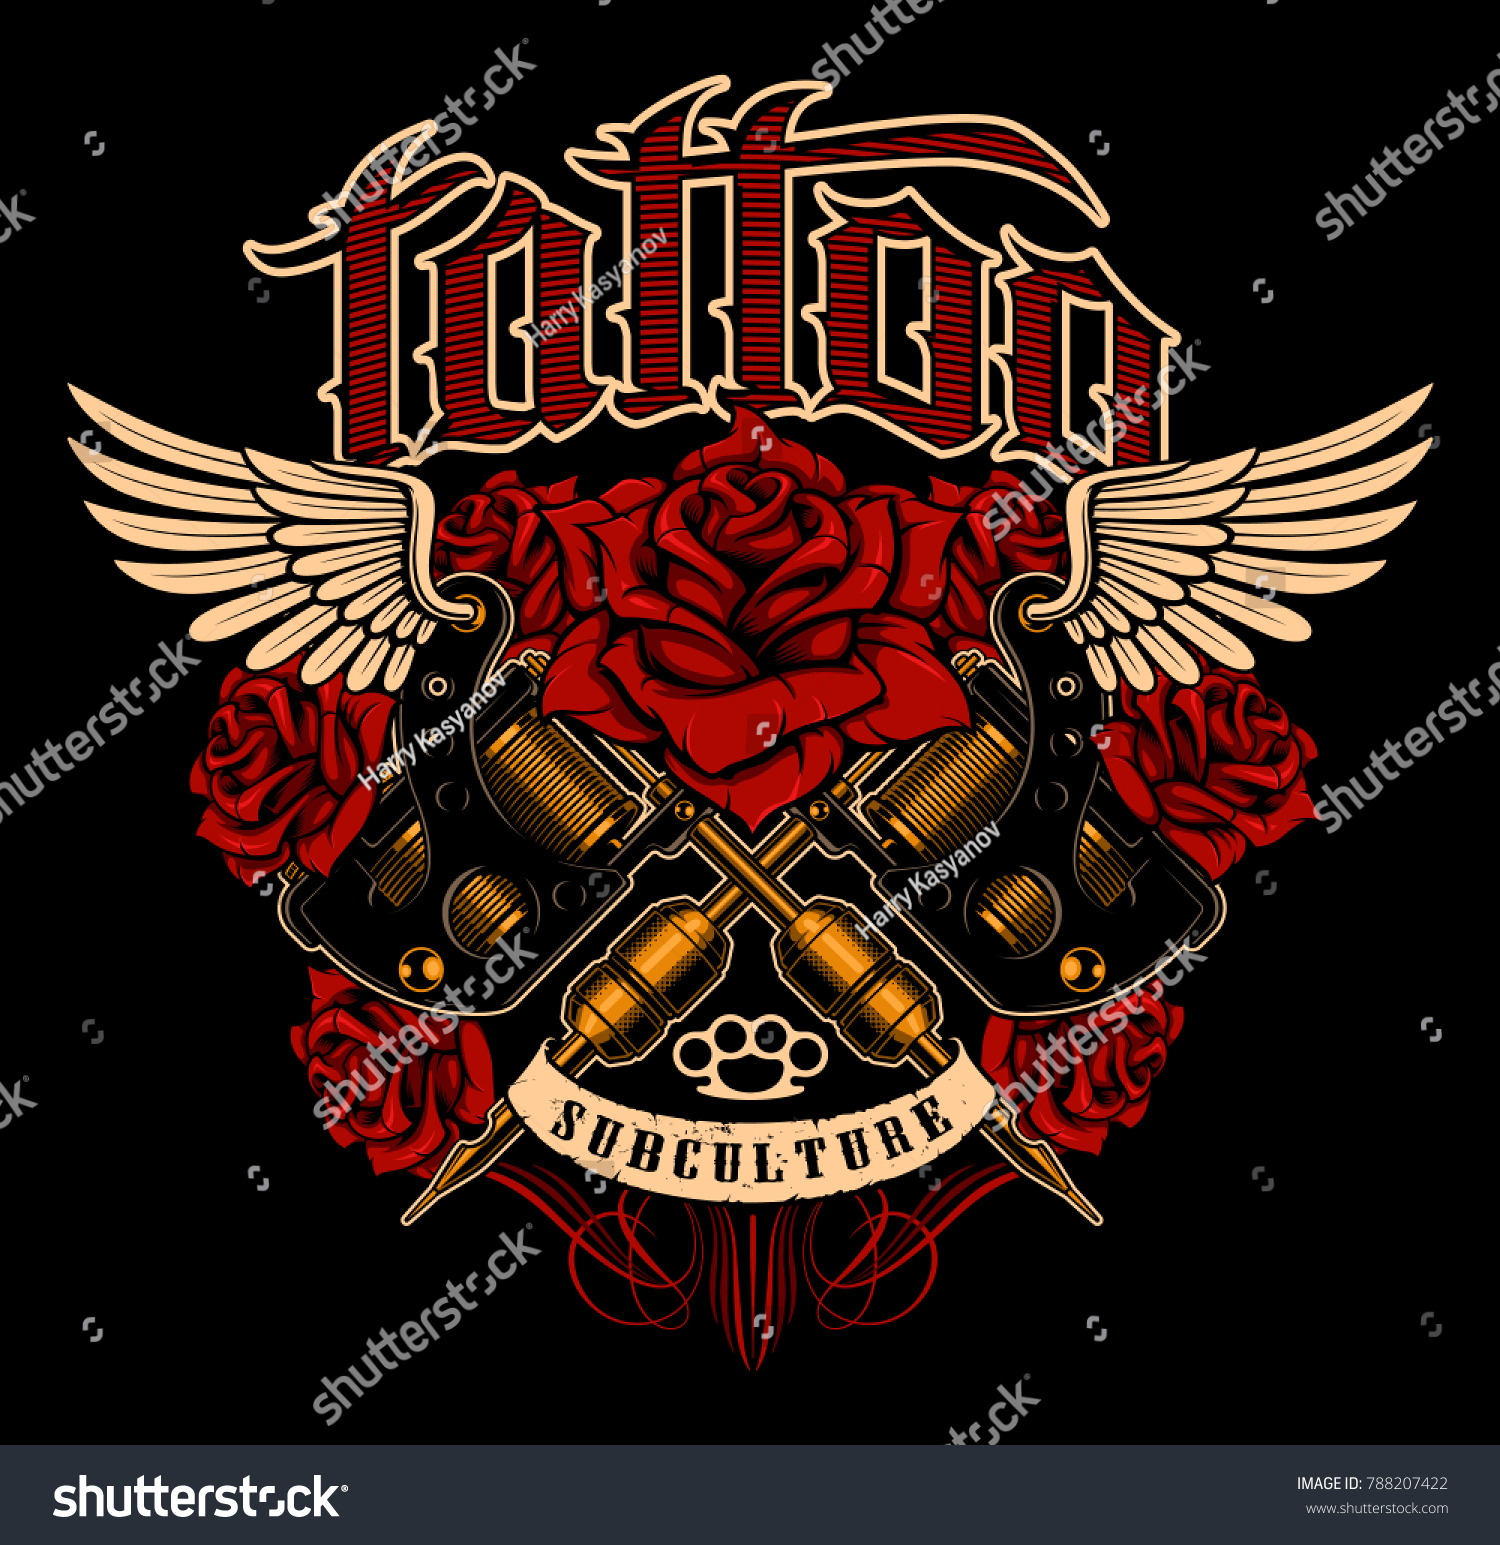 Tattoo Design Shirt Graphic Old School Stock Vector (Royalty Free ...